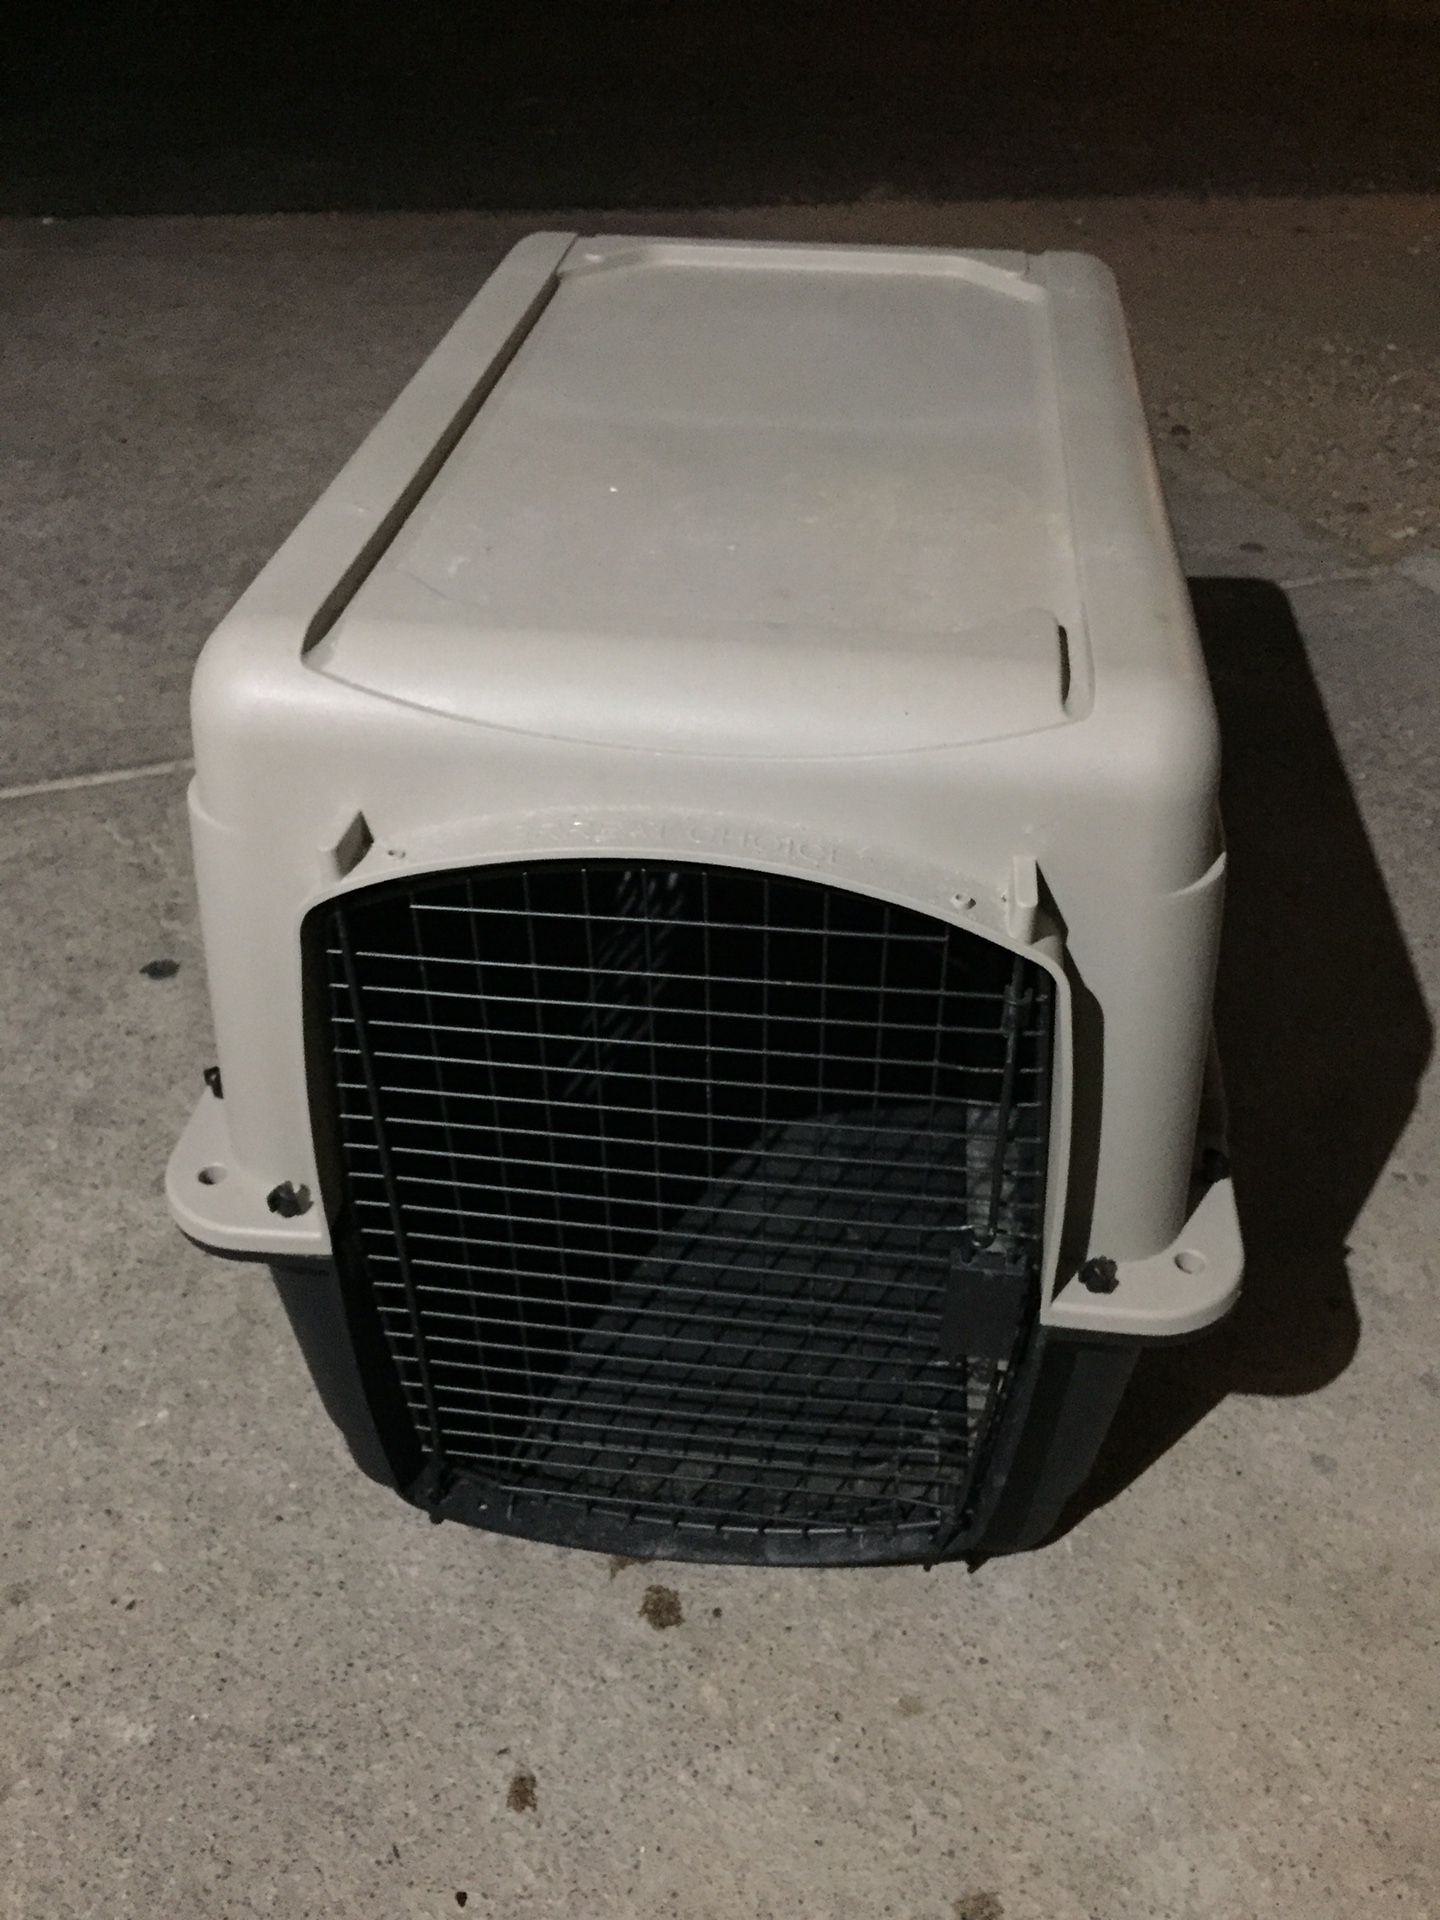 Dog kennel crate LG